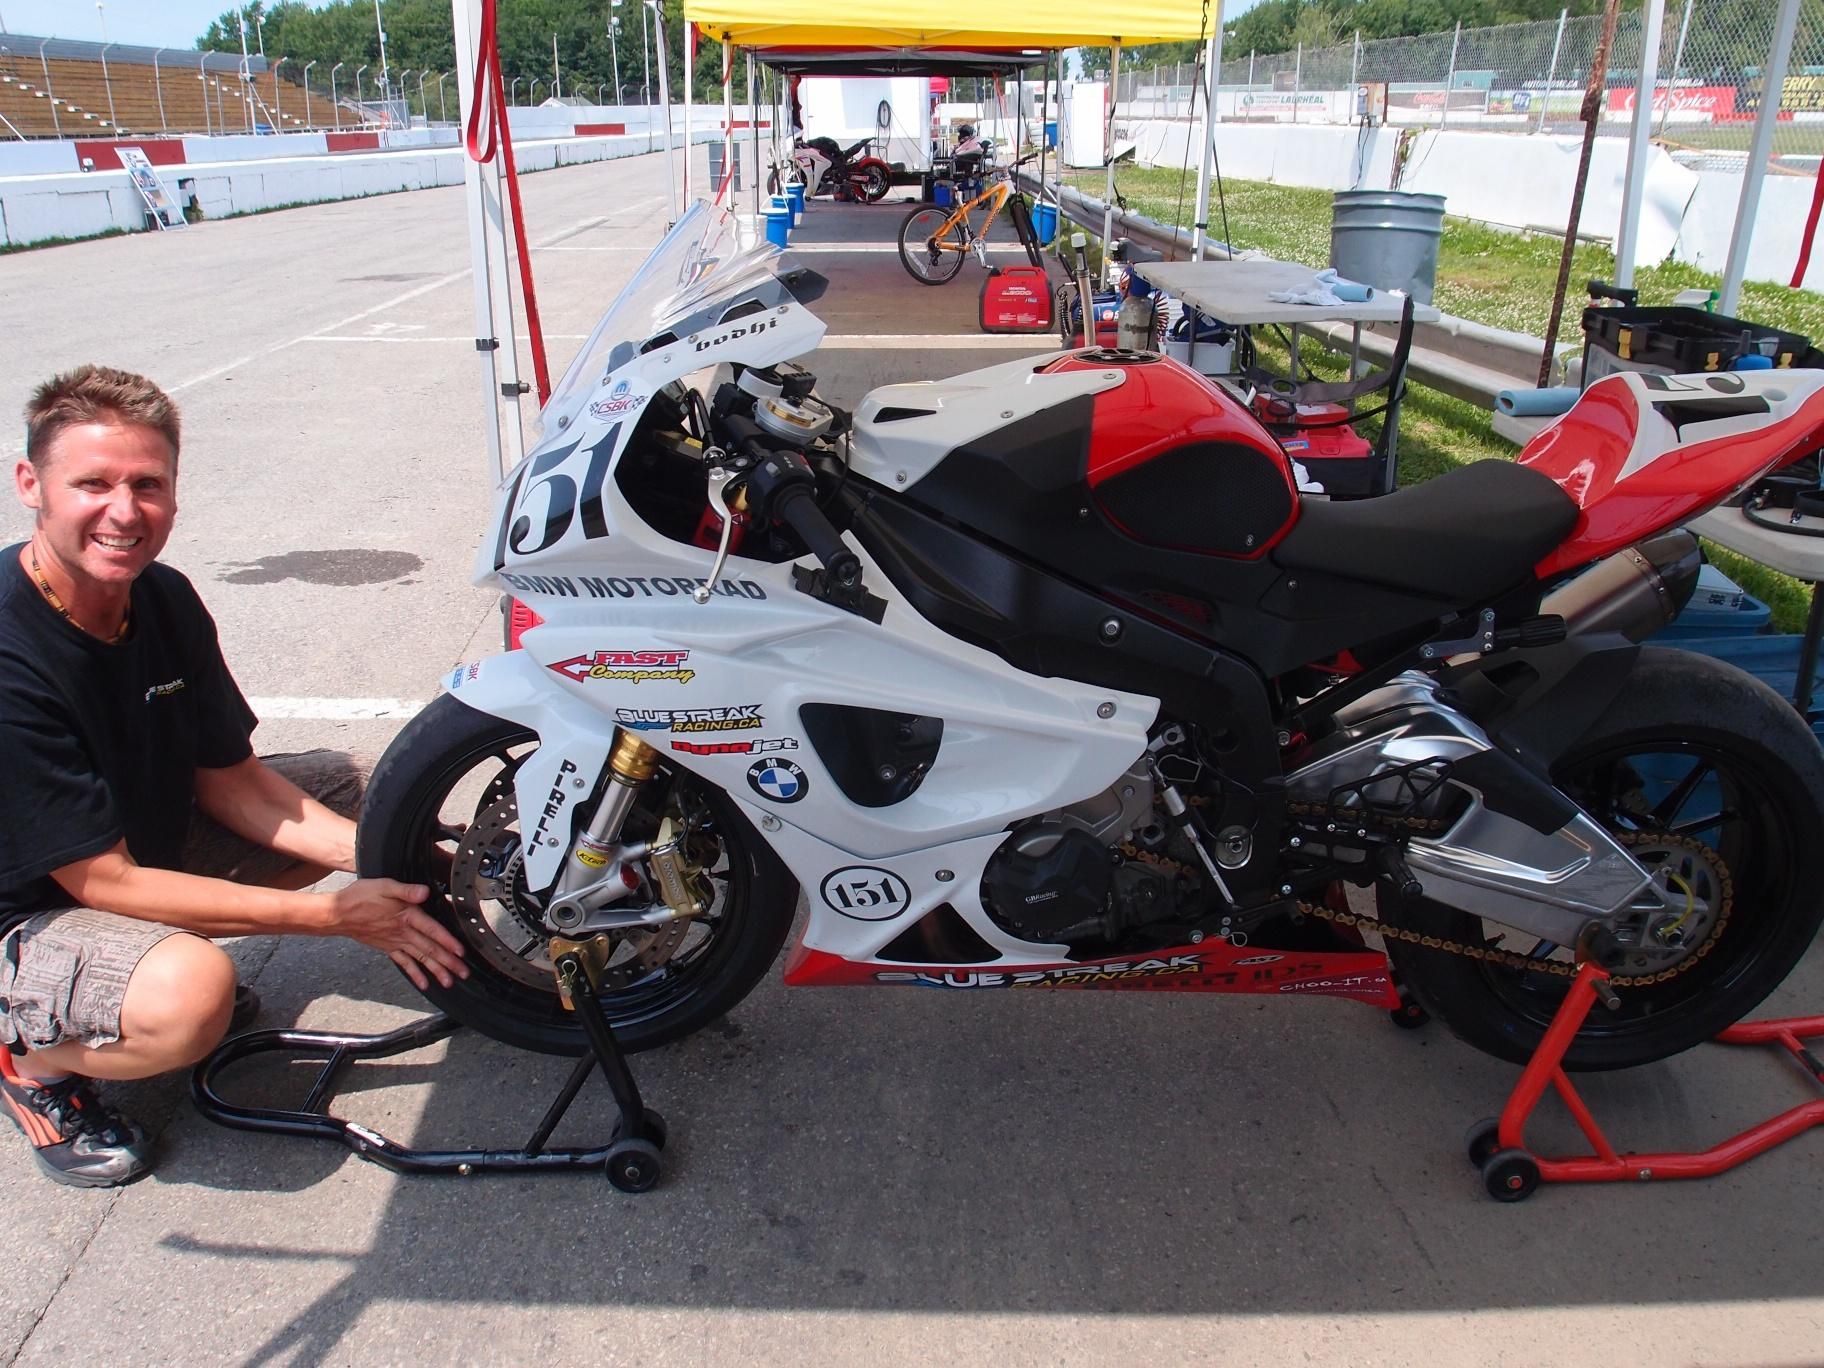 Superbike tech at work in the pits #csbk